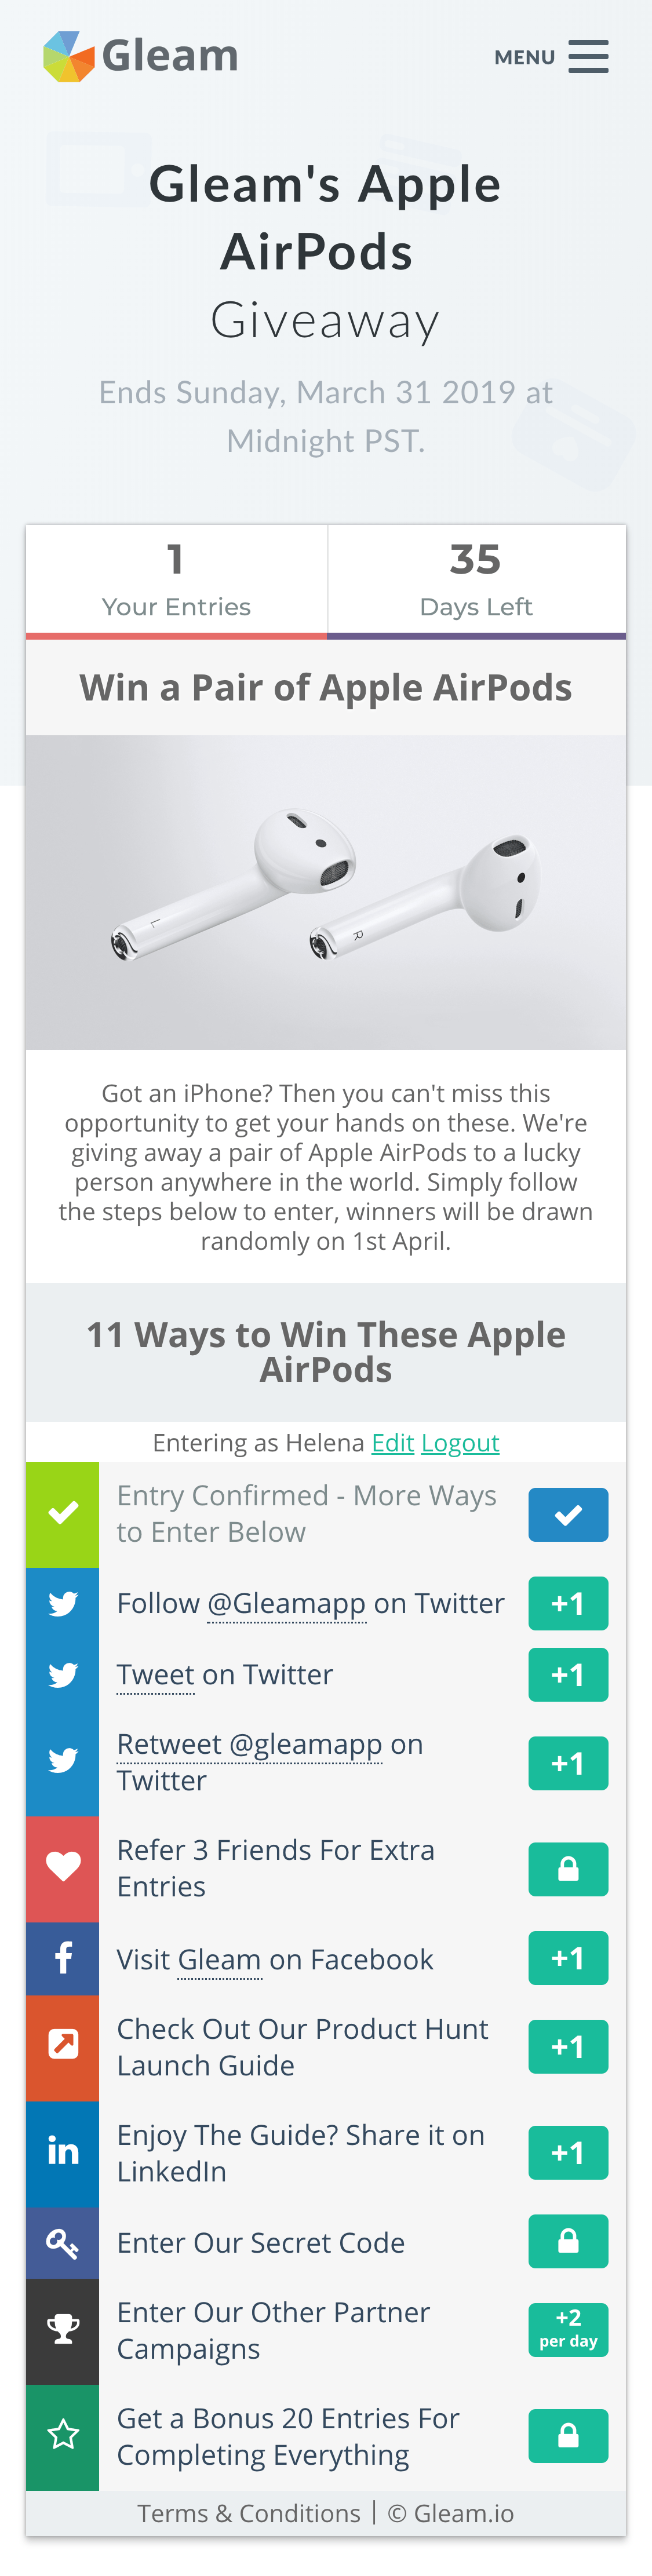 Mobile view of a Gleam giveaway campaign